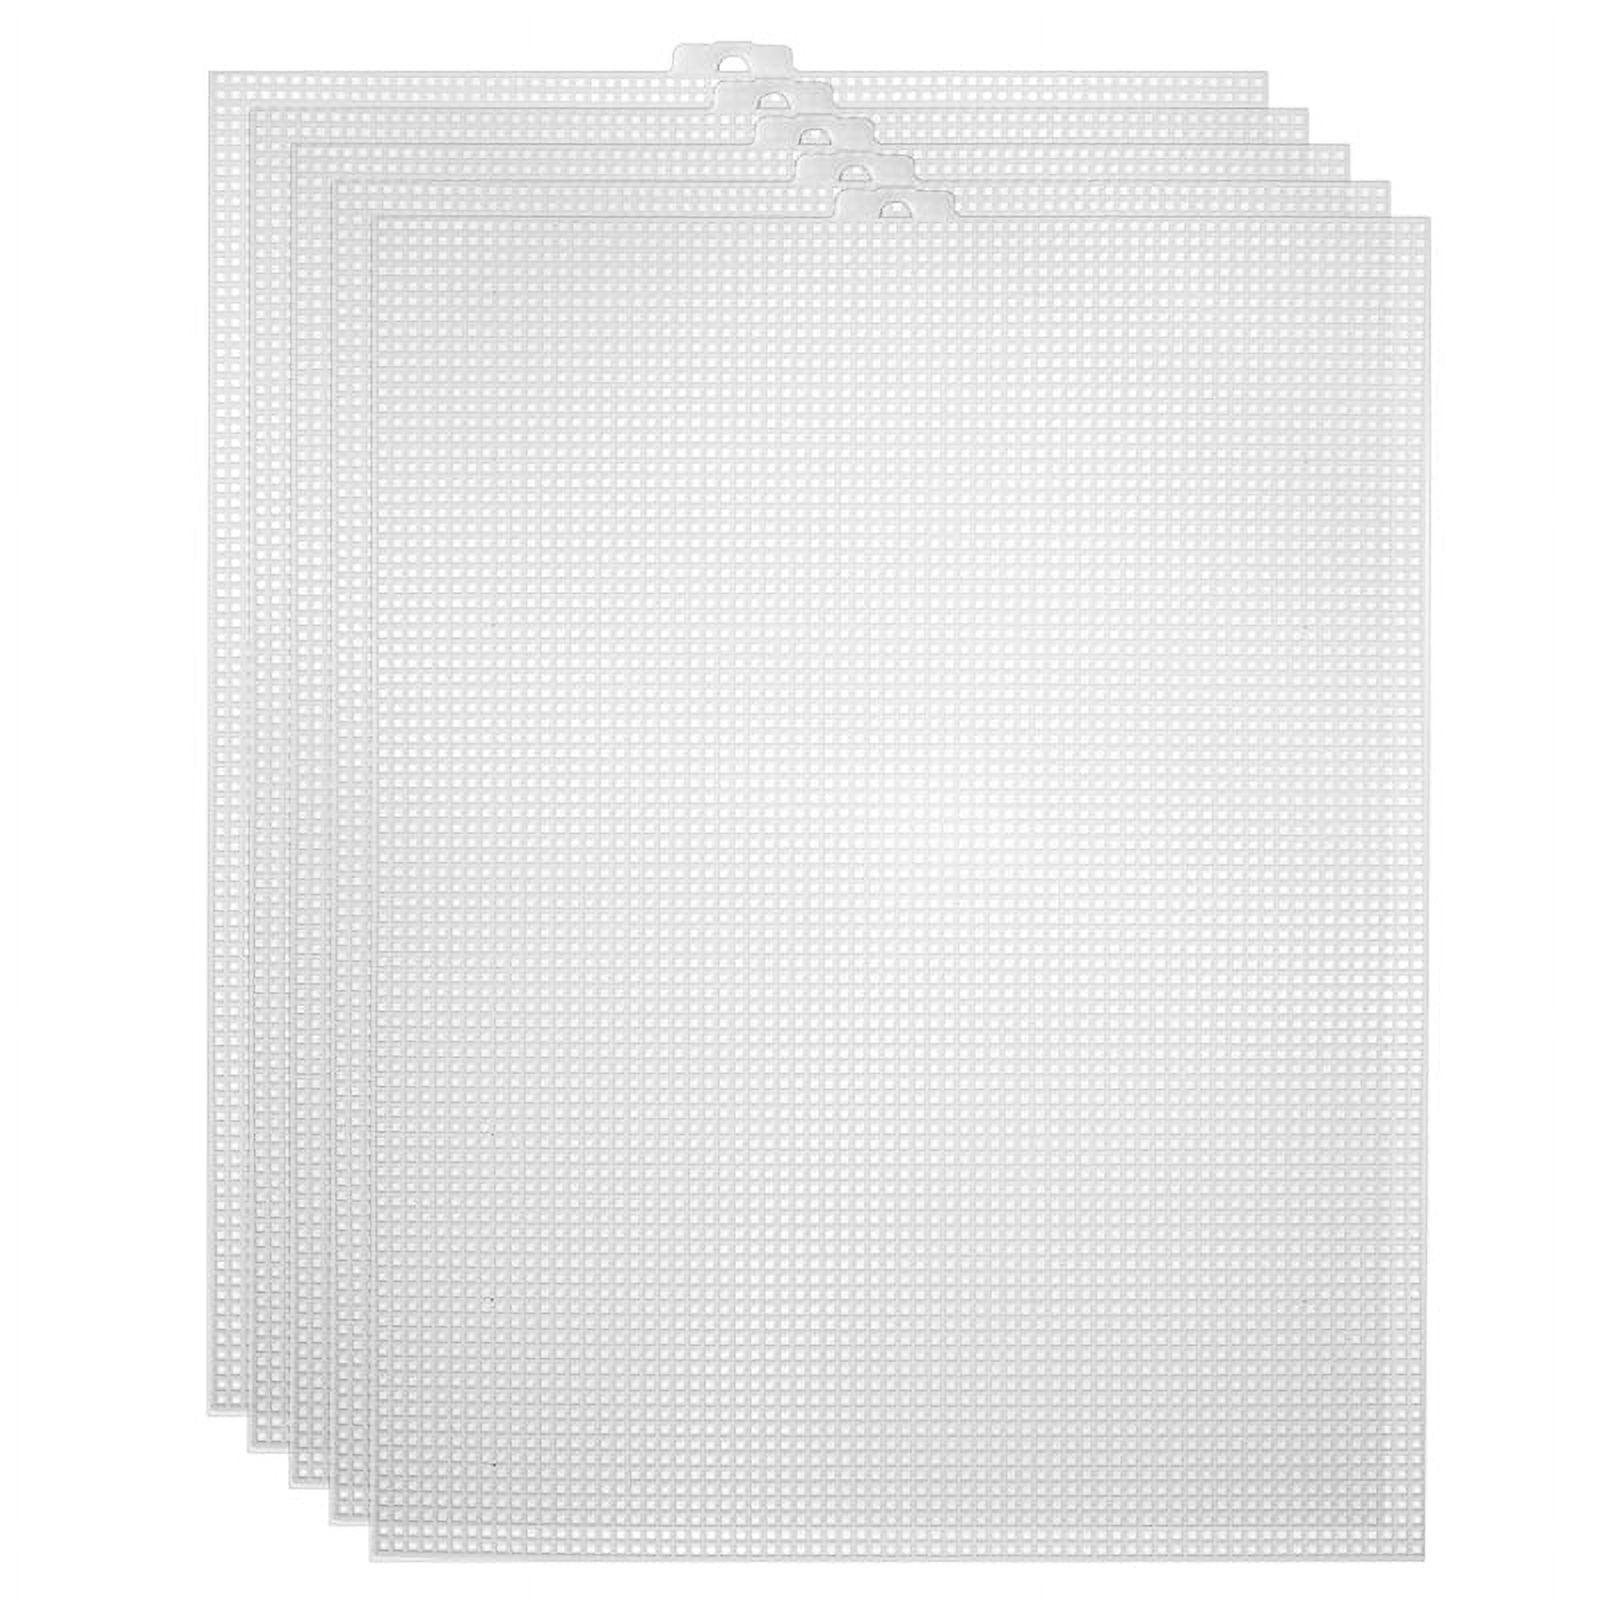 BUYGOO 20 Pack 6 Count Clear Plastic Mesh Canvas Sheets for Embroidery, Acrylic Yarn Crafting, Knit and Crochet Projects - 10